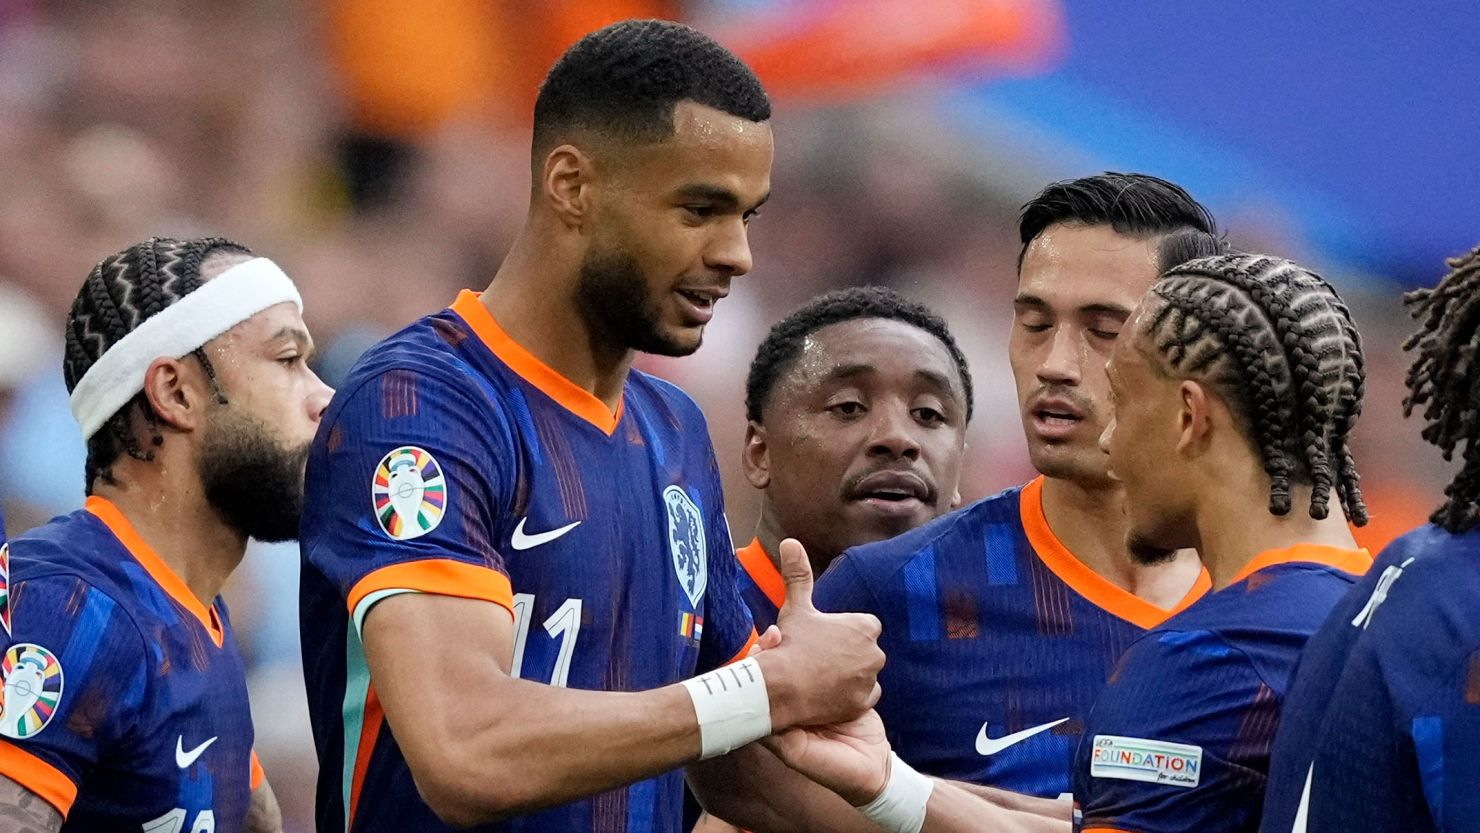 Cody Gakpo celebrates with his teammates after scoring the Netherlands' first goal against Romania.